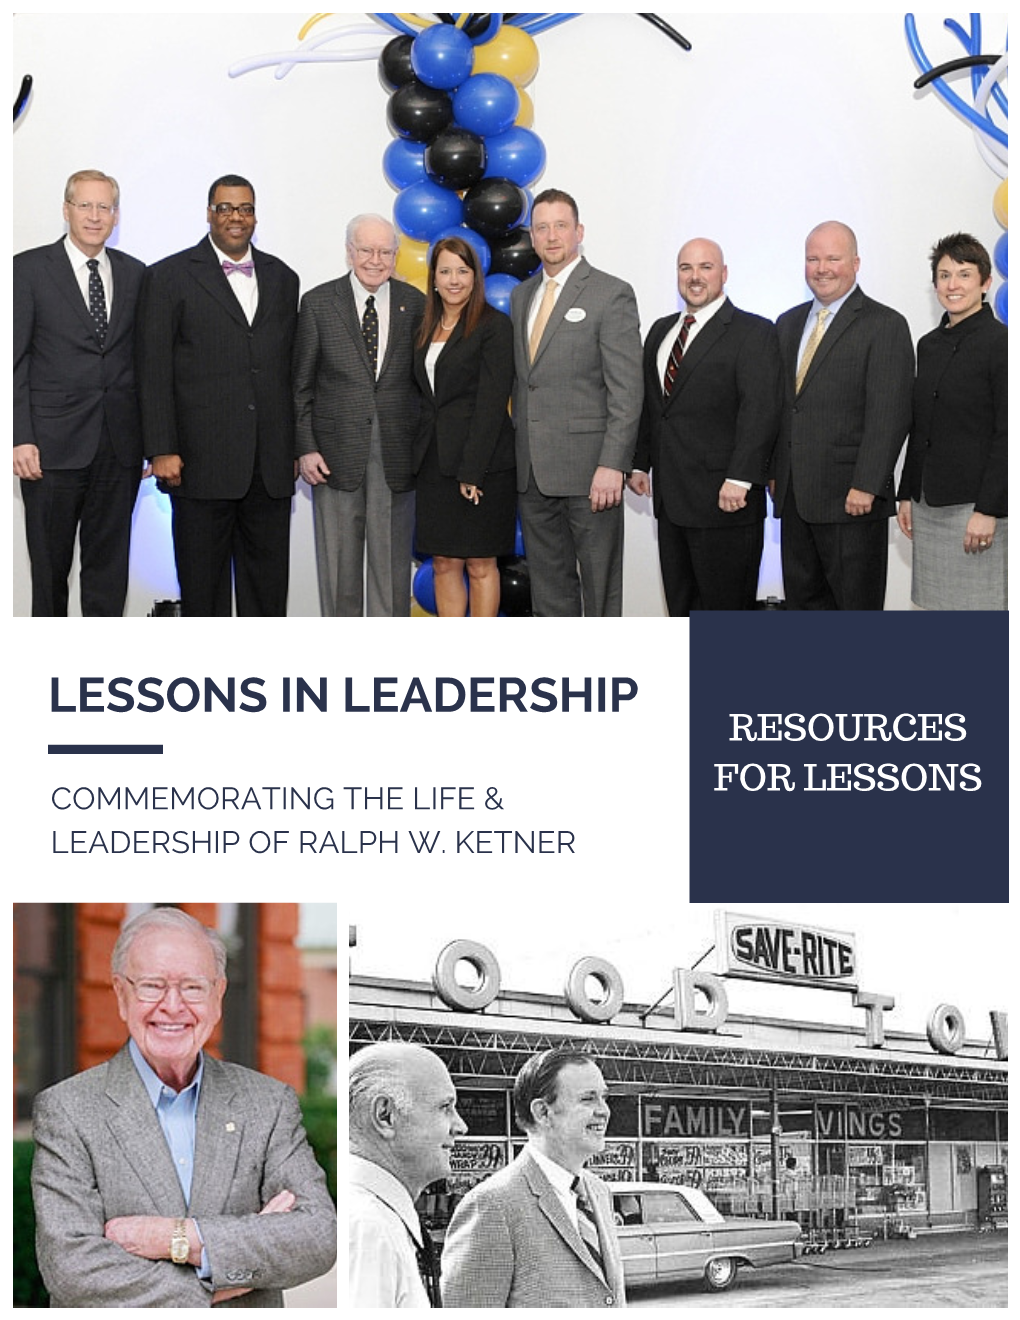 Resources for Lessons Commemorating the Life & Leadership of Ralph W